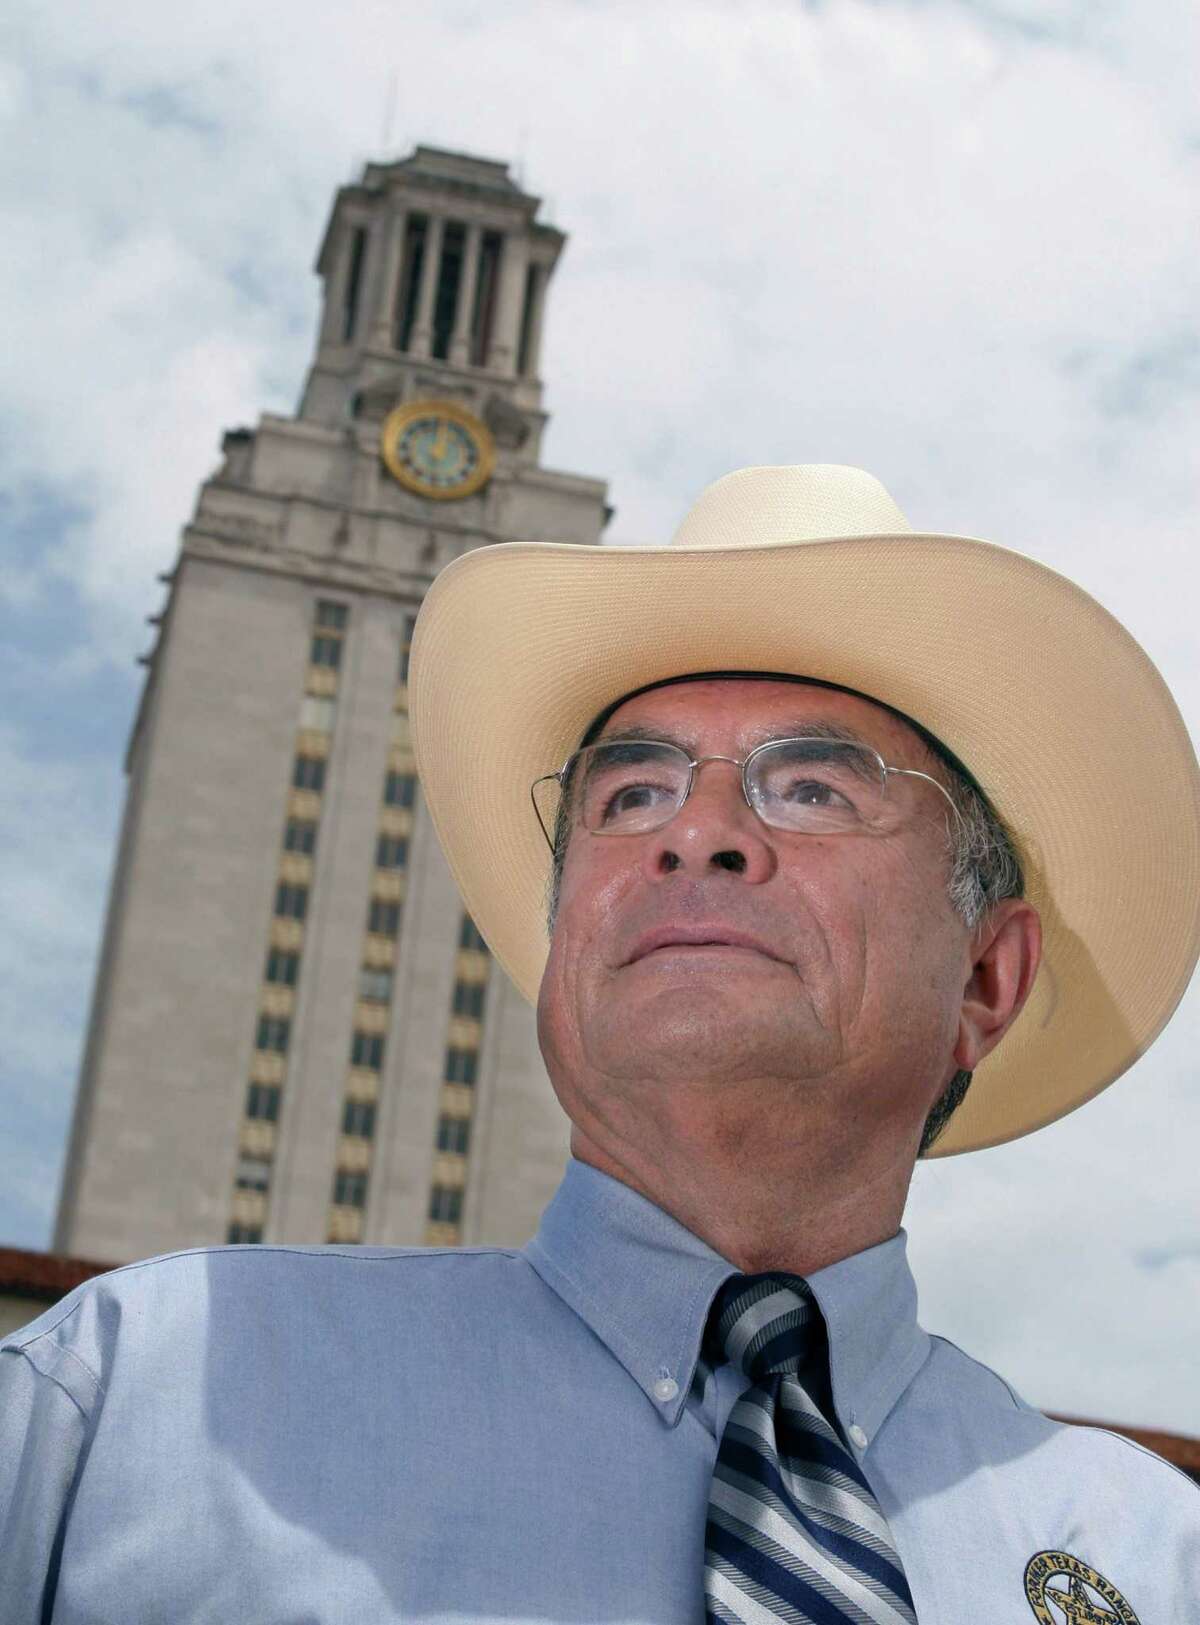 Former Austin Police Officer and Texas Ranger Ramiro “Ray” Martinez was one of the officers who stopped sniper Charles Whitman on the tower’s observation deck on Aug. 1, 1966.